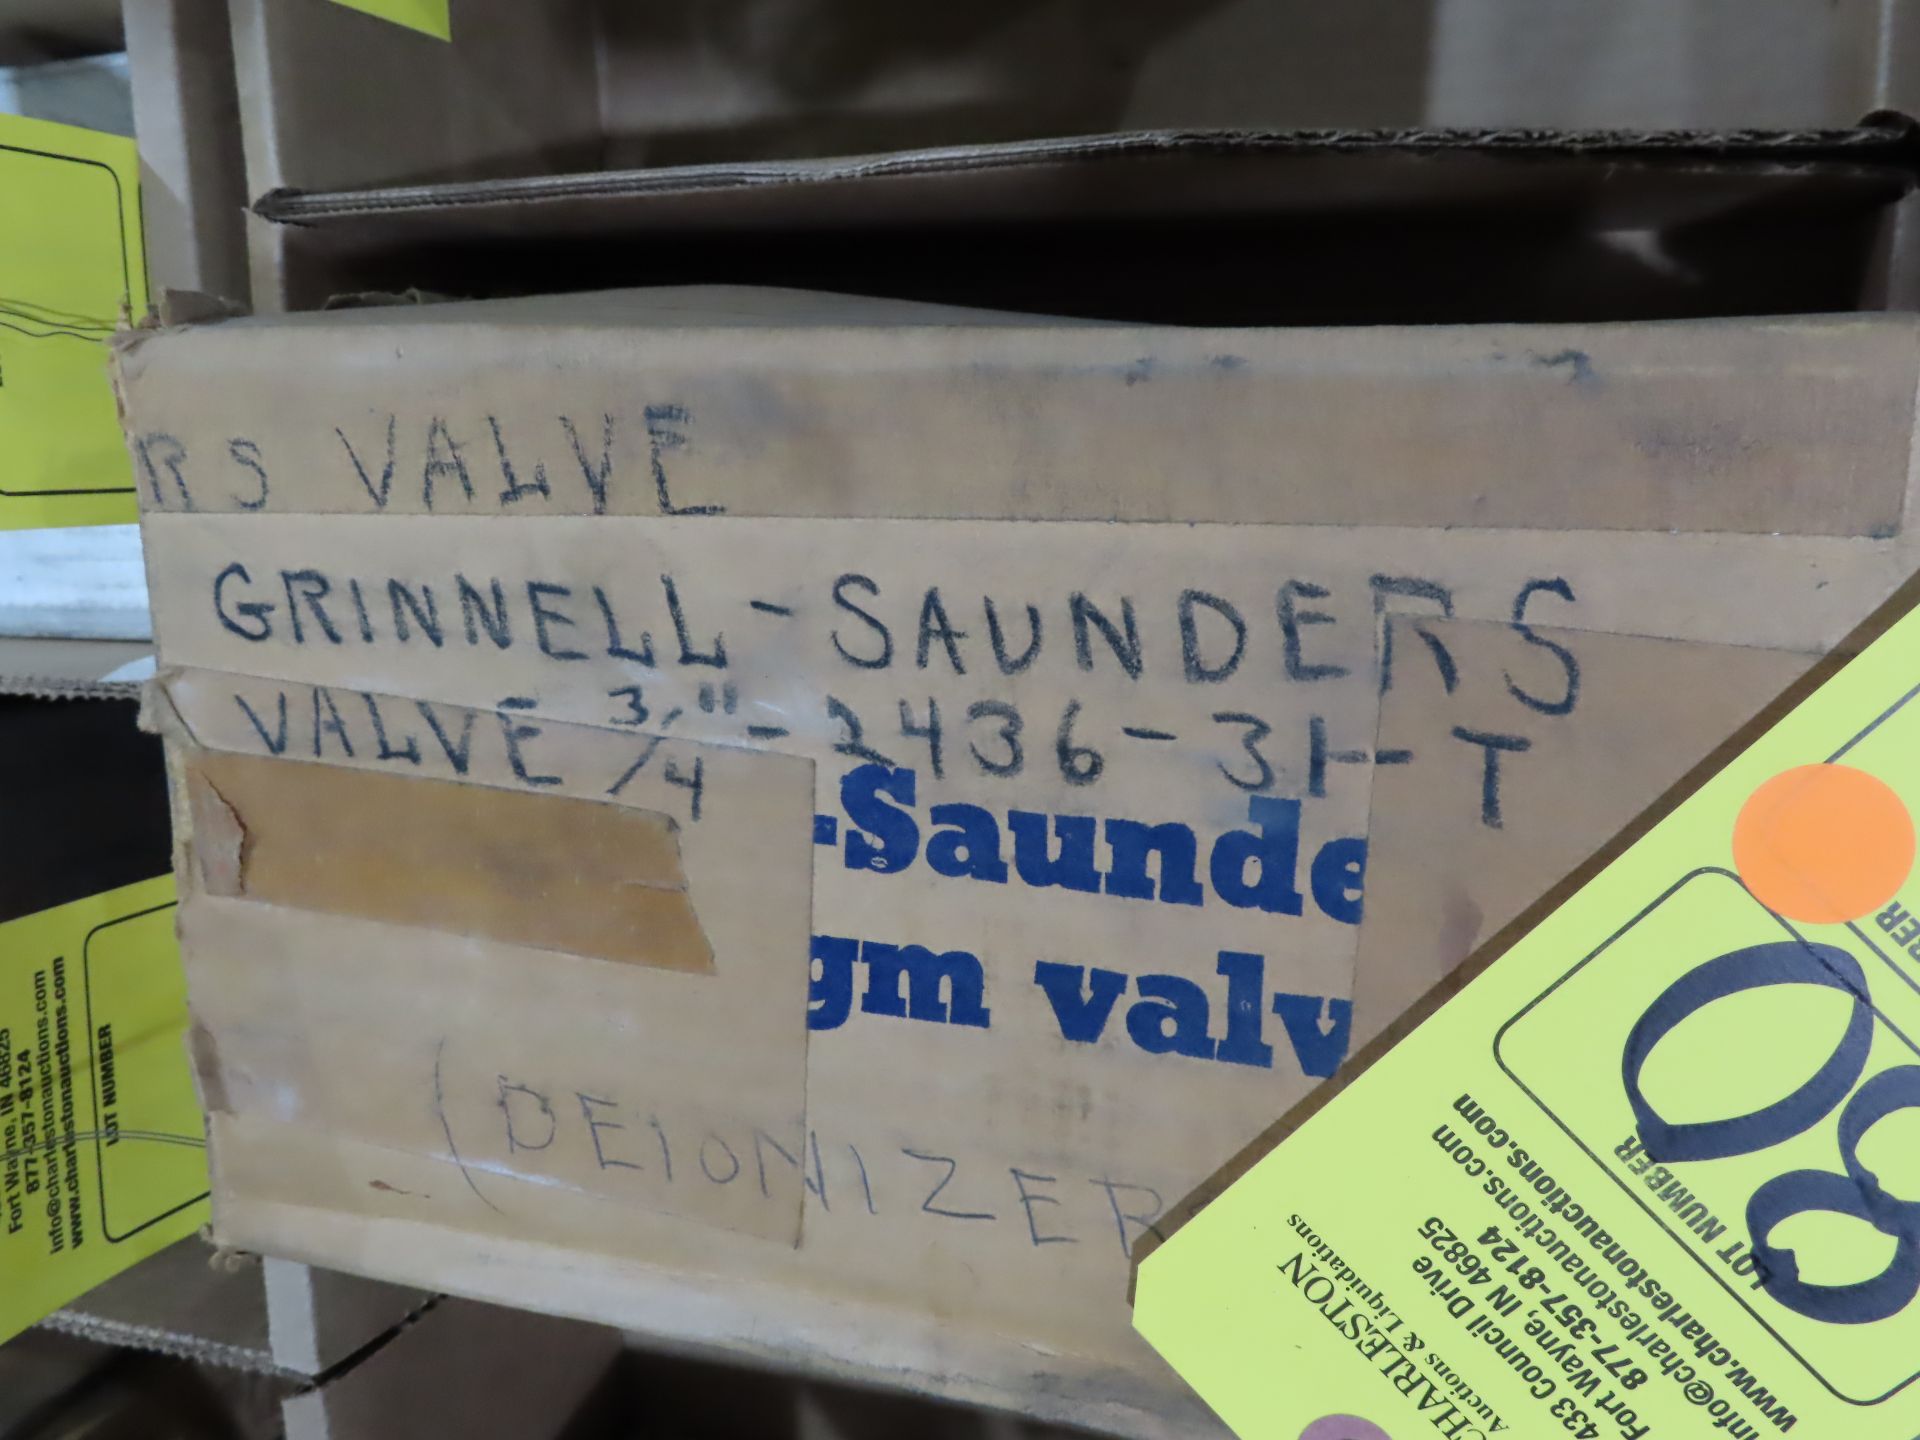 Grinnell Saunders valve model 3/4"-2436-31-T, new in box, as always with Brolyn LLC auctions, all - Image 2 of 2